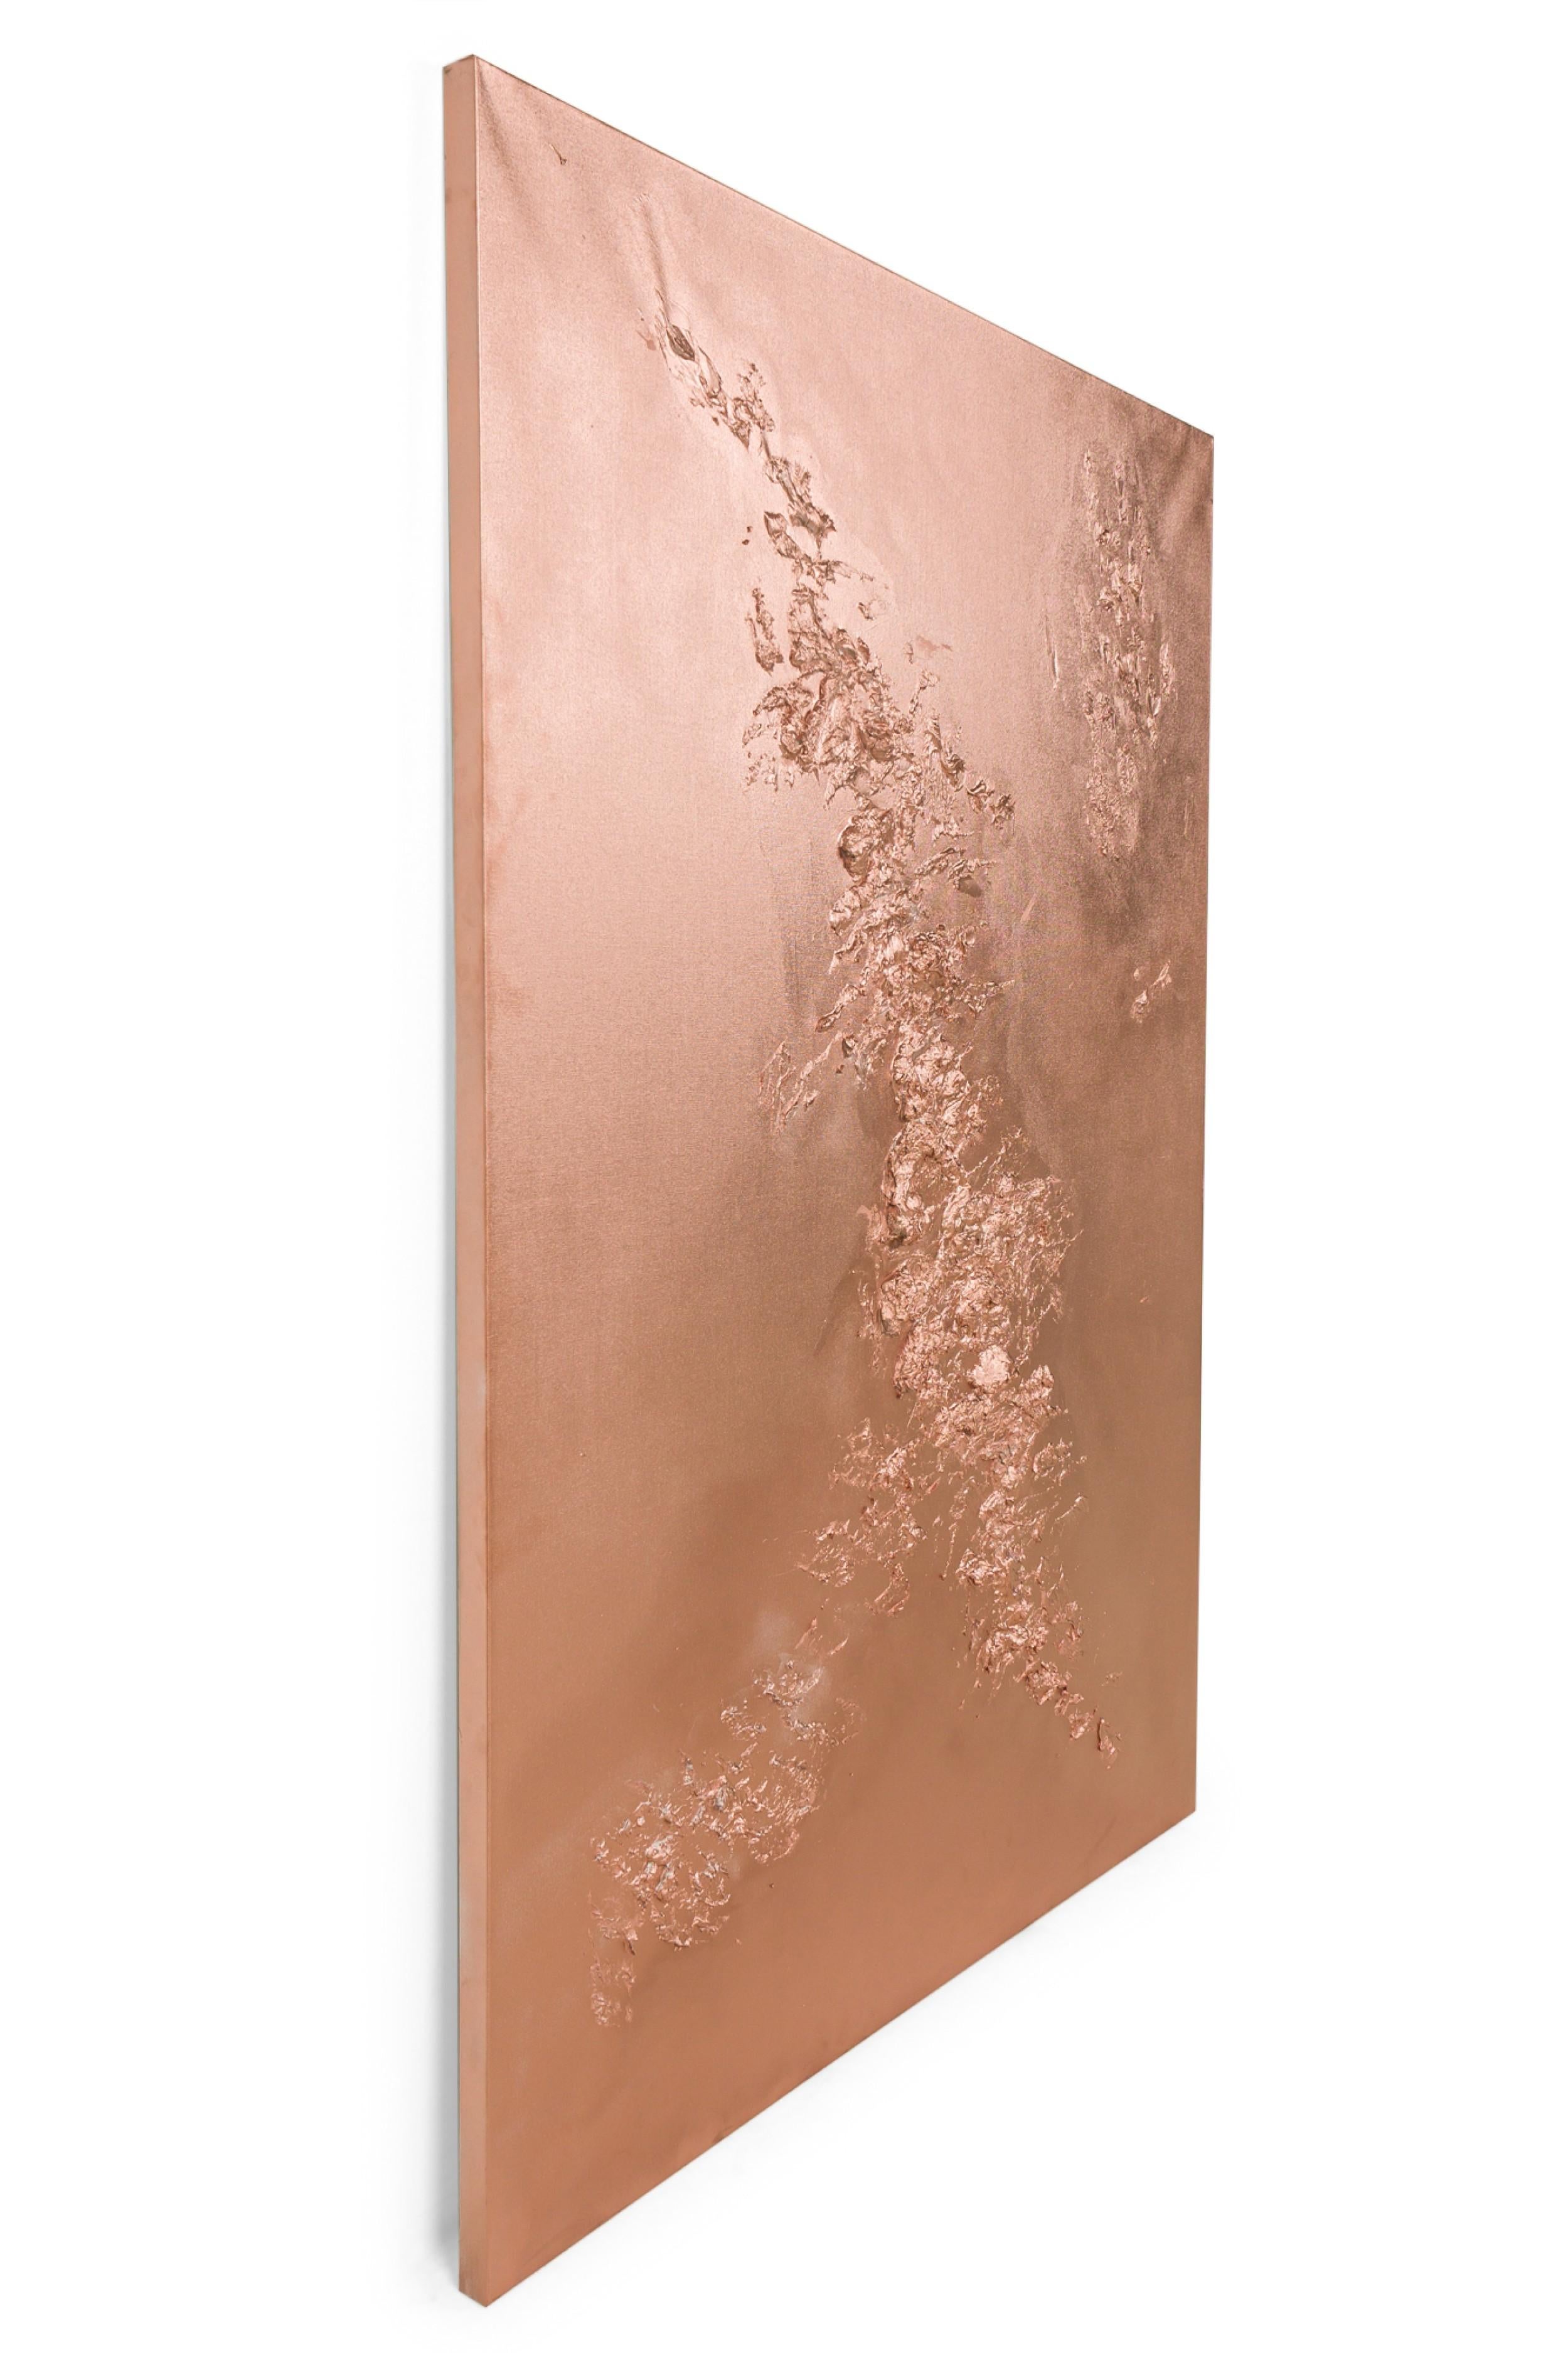 Contemporary abstract mixed media painting with textured 3D shapes painted in a metallic copper on rectangular stretched canvas. (BARBARA KISKOVSKI)
